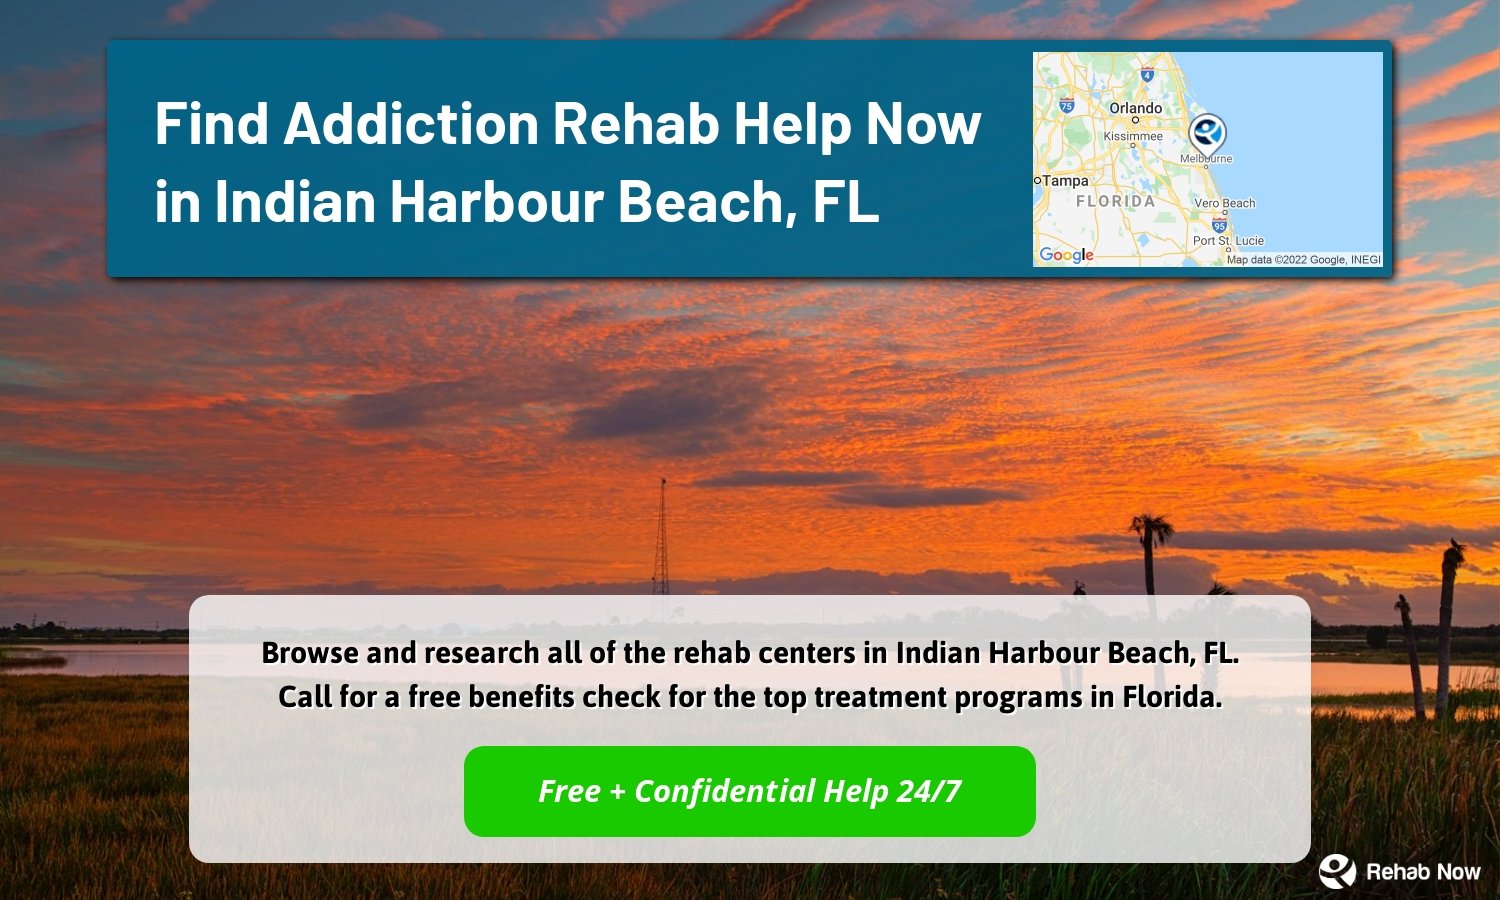 Browse and research all of the rehab centers in Indian Harbour Beach, FL. Call for a free benefits check for the top treatment programs in Florida.